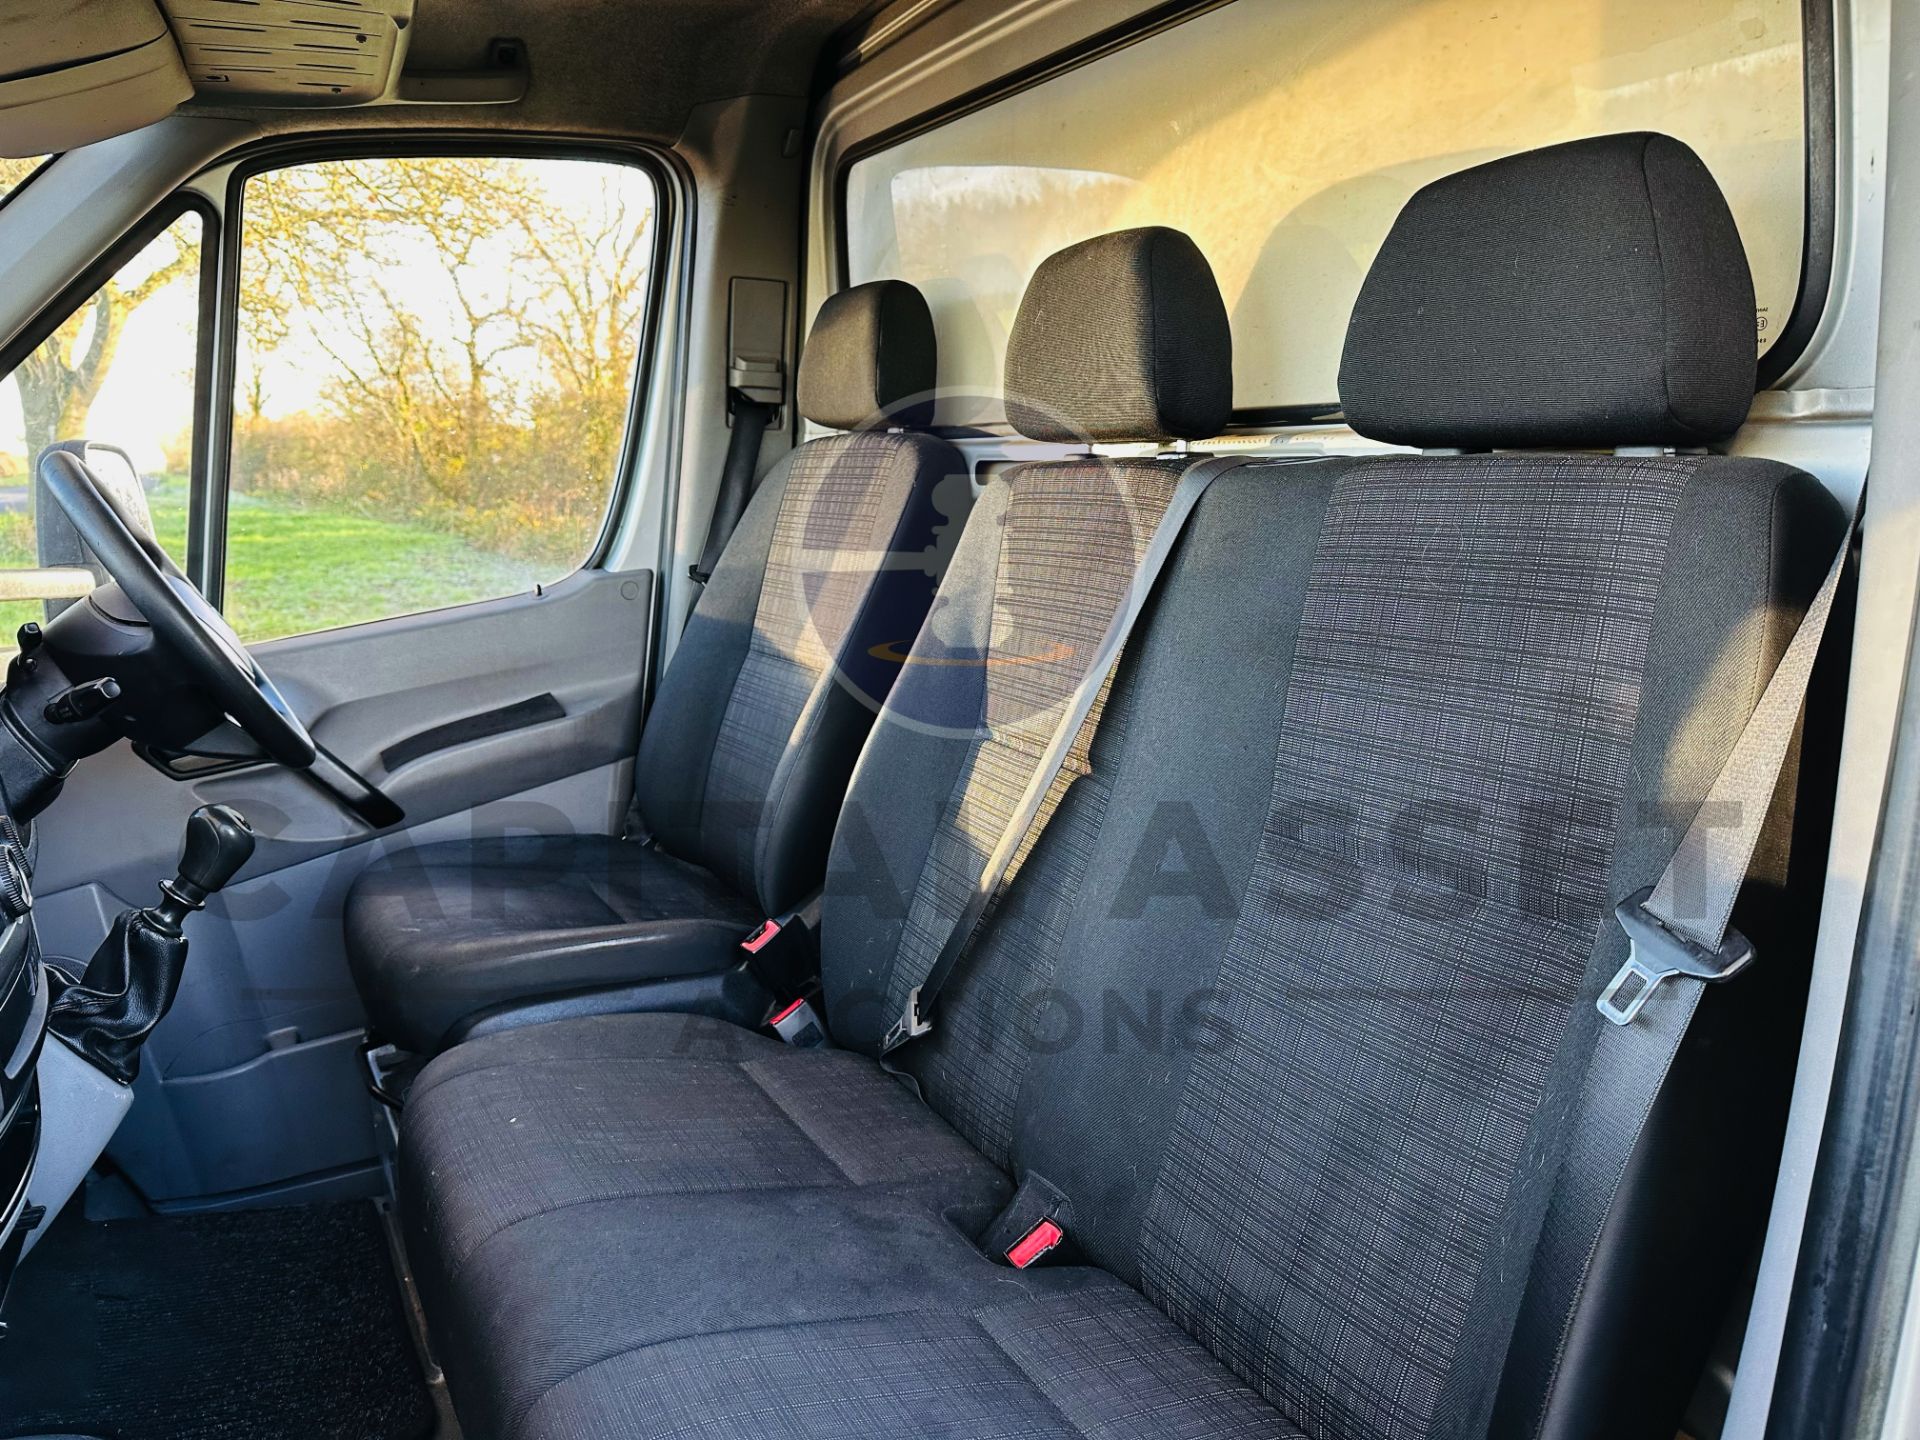 MERCEDES-BENZ SPRINTER 313 CDI - *LWB CURTAINSIDER TRUCK* - 2016 MODEL - 3 SEATER CABIN - AIR CON!!! - Image 12 of 26